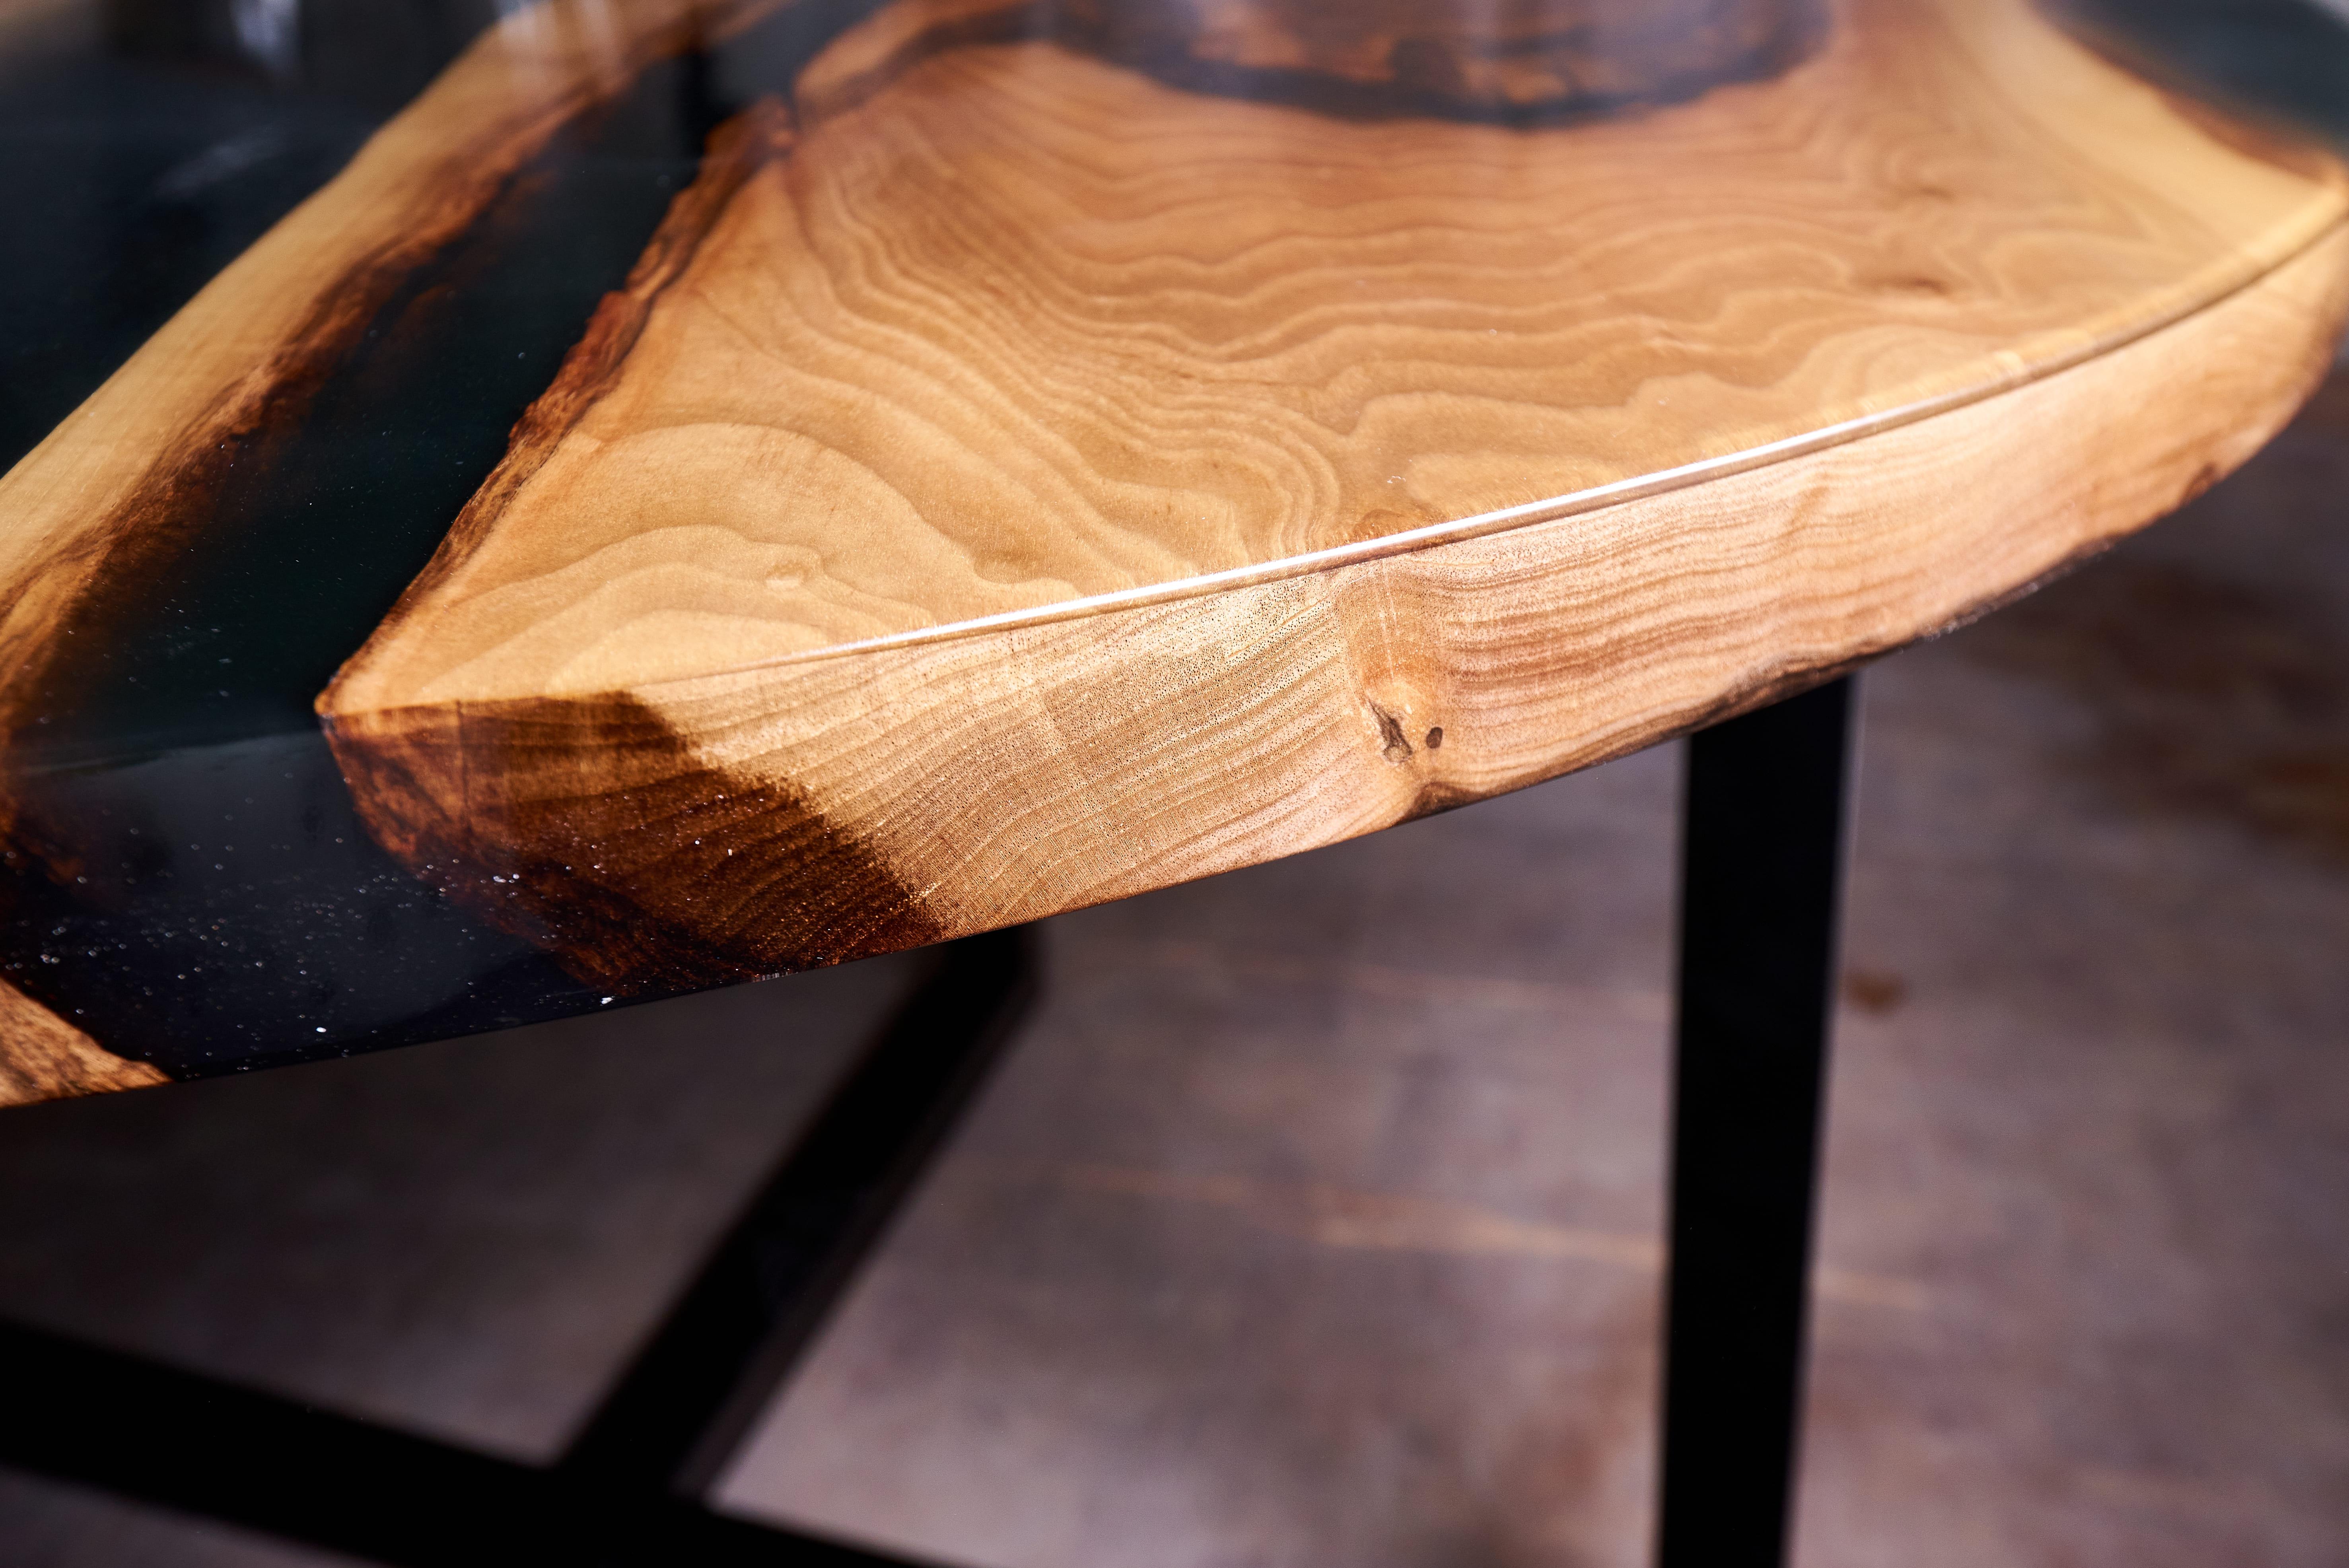 Two flashes of light in the darkness. Two comets that will meet only once for a short time. After that they will part forever. A short but priceless moment.

Table in antique dark walnut and black epoxy slabs. Coated with glossy hard lacquer for